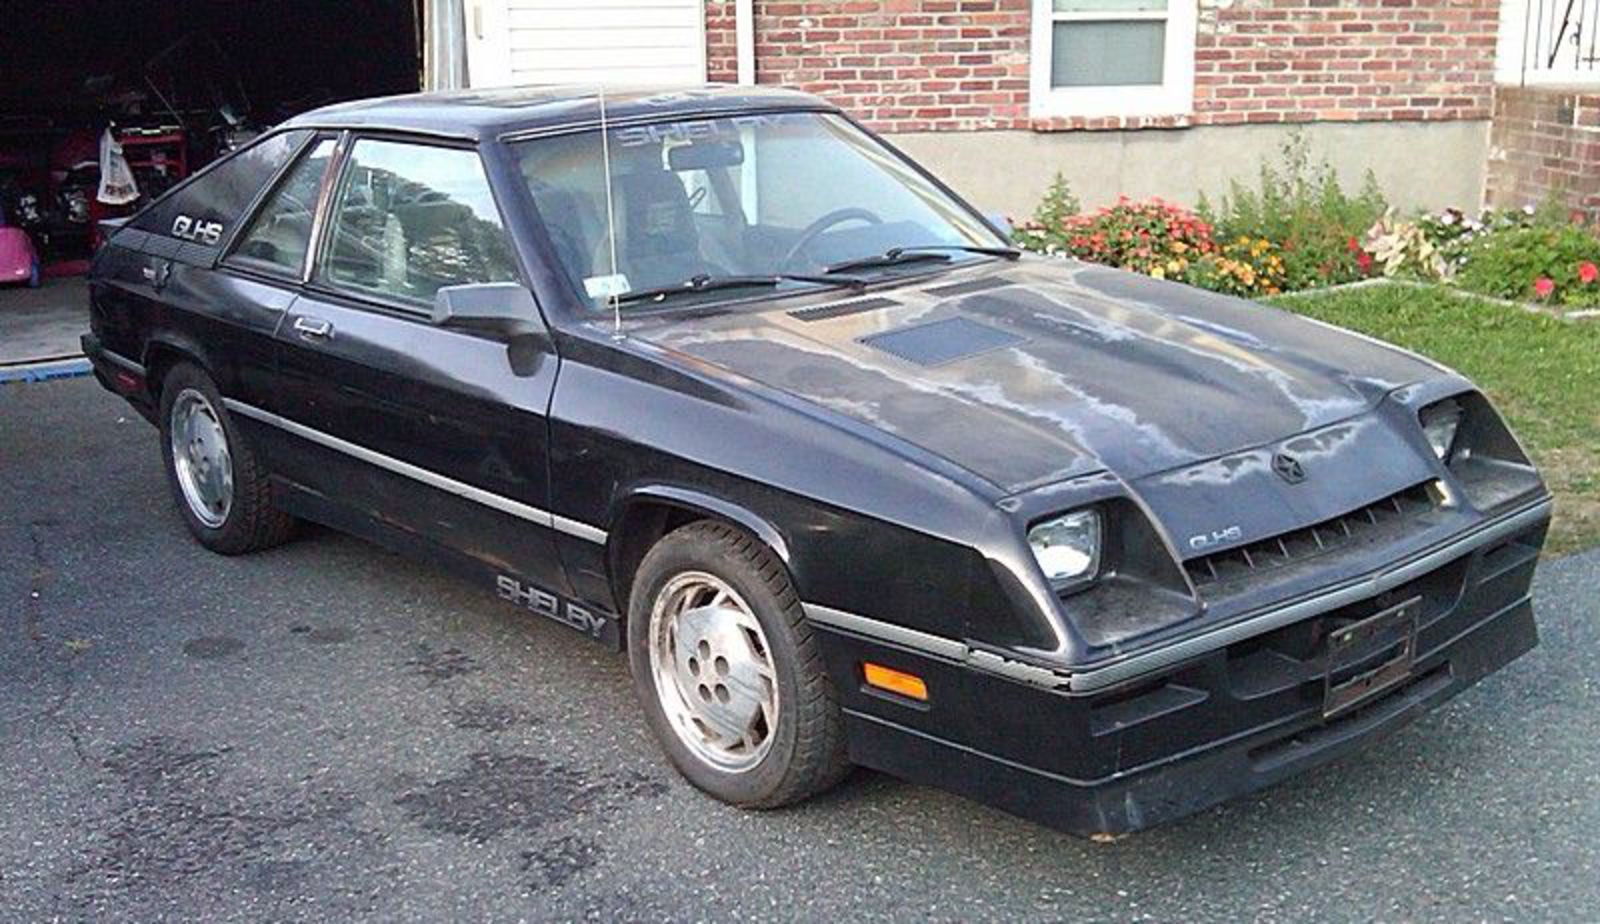 I have a 1987 Dodge Shelby Charger GLHS #266 for sale,